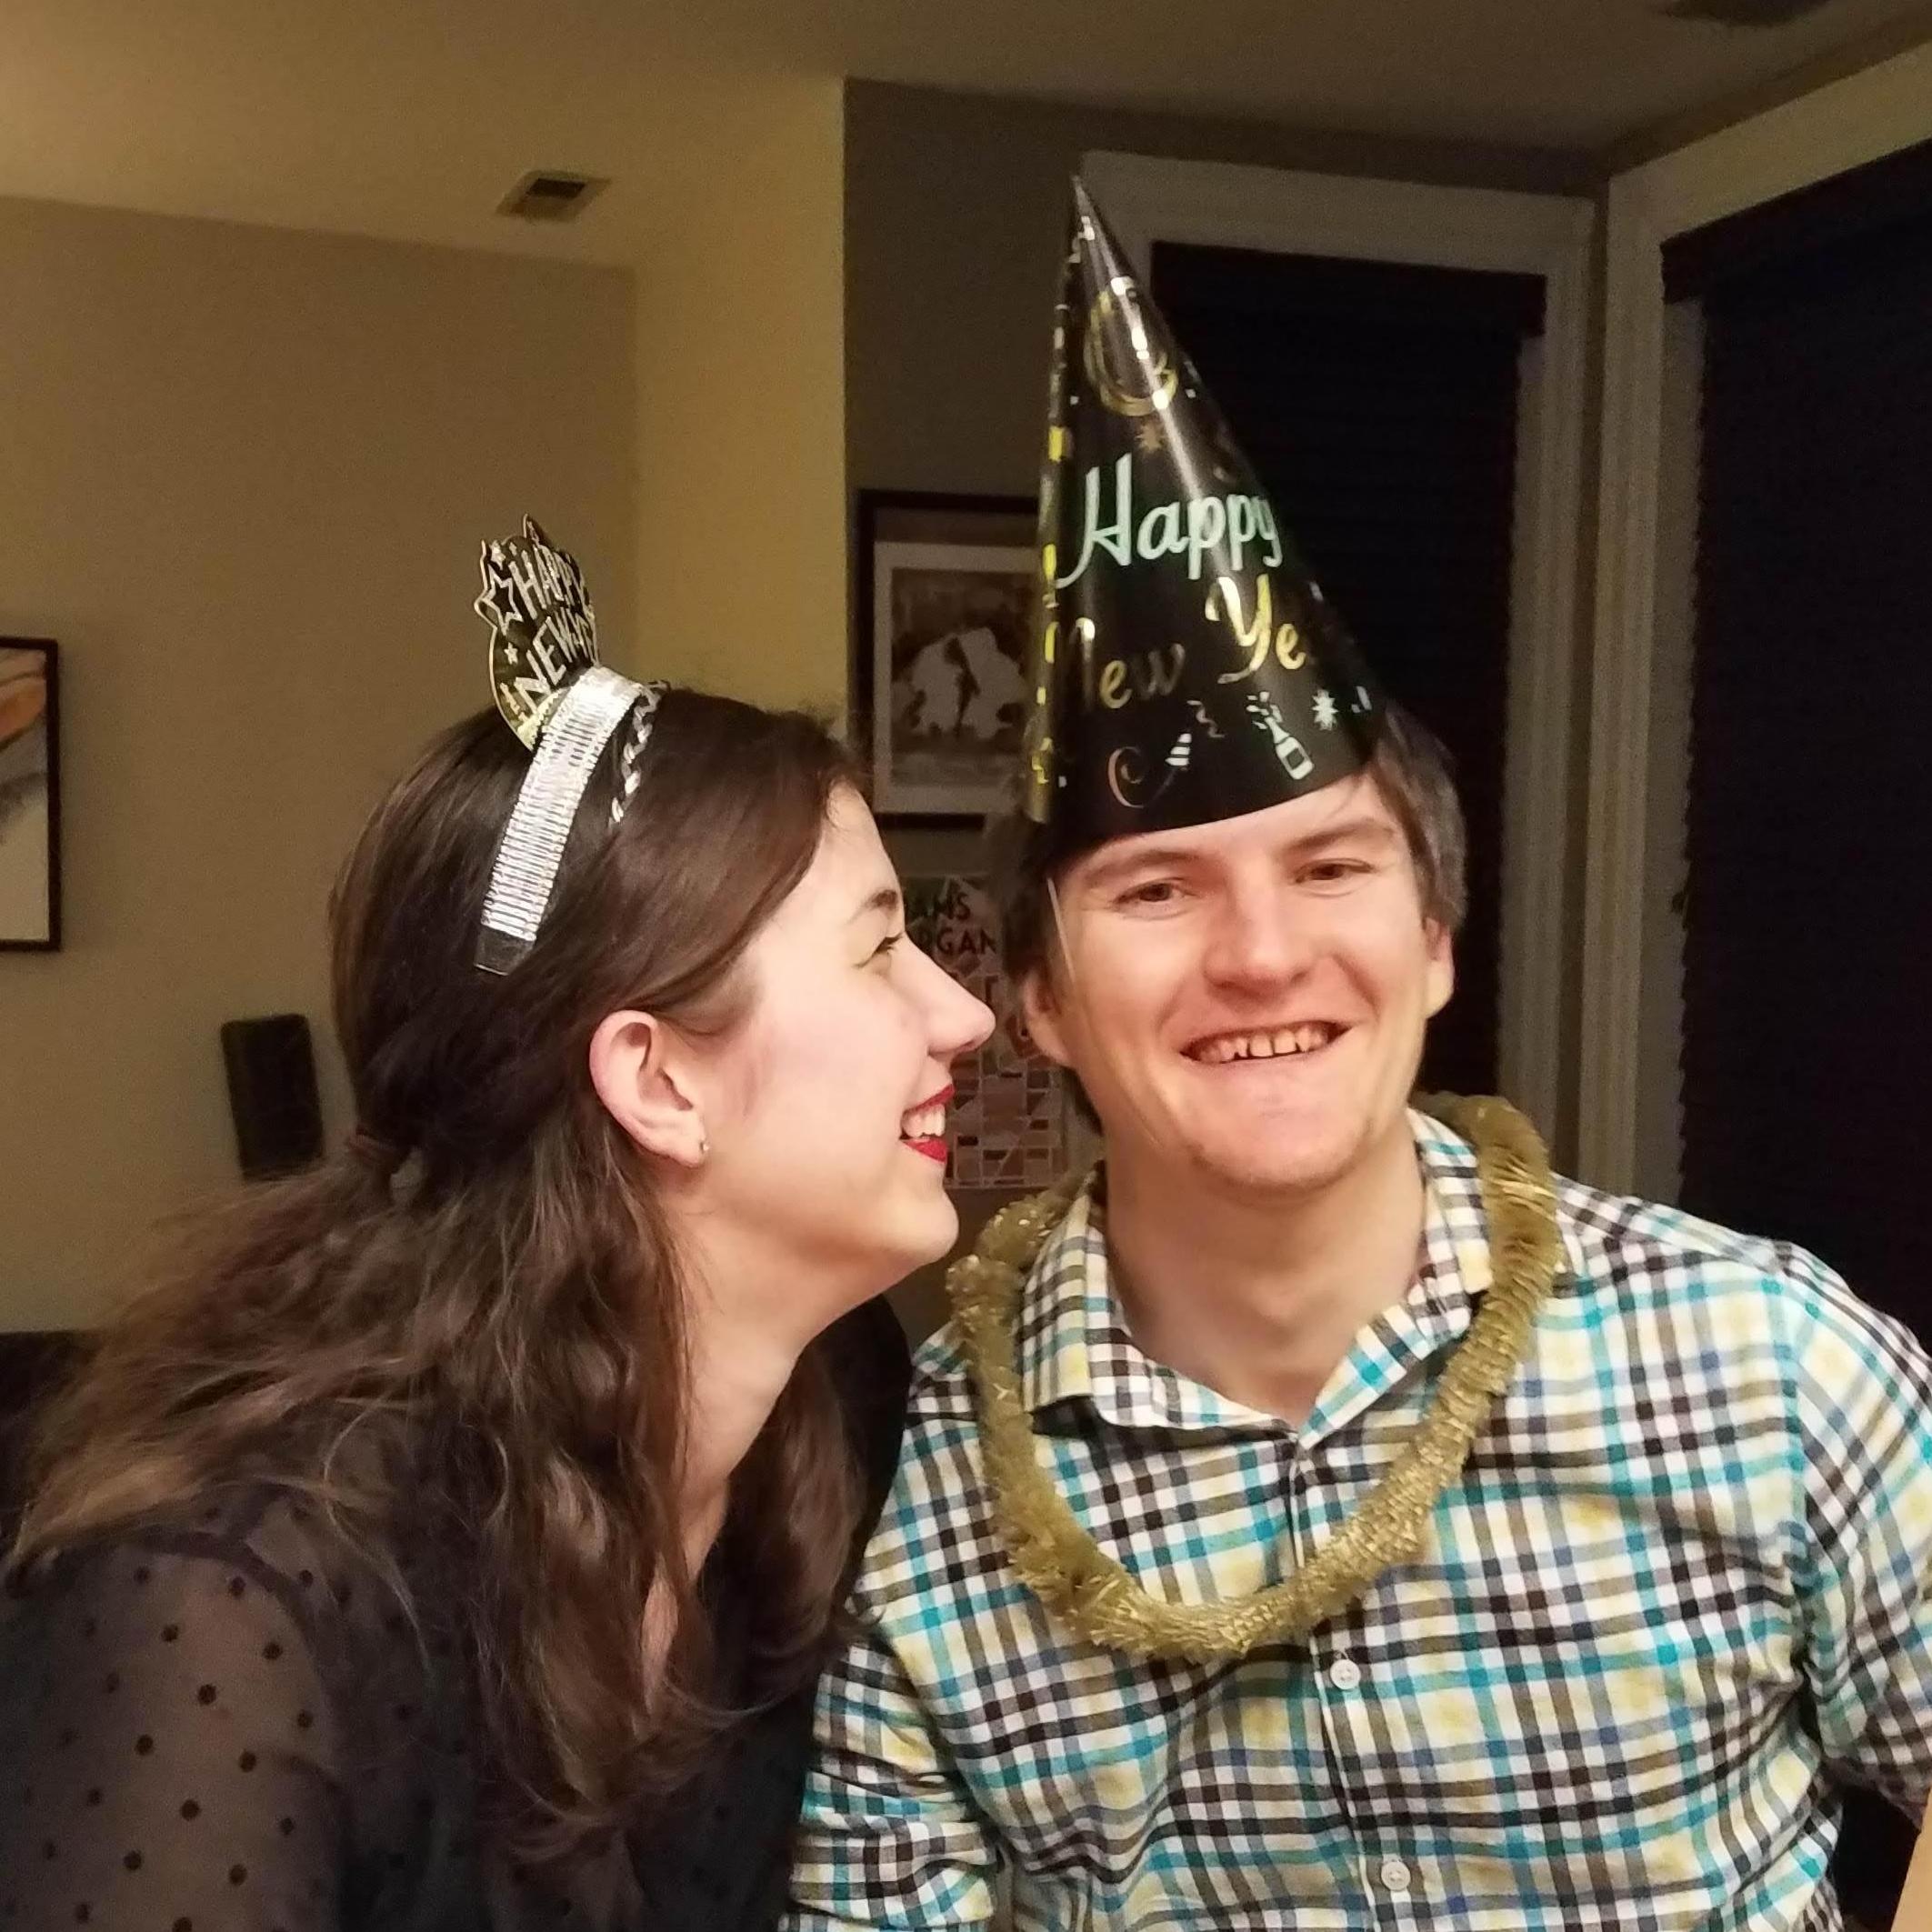 Laughing on New Year's Eve 2018